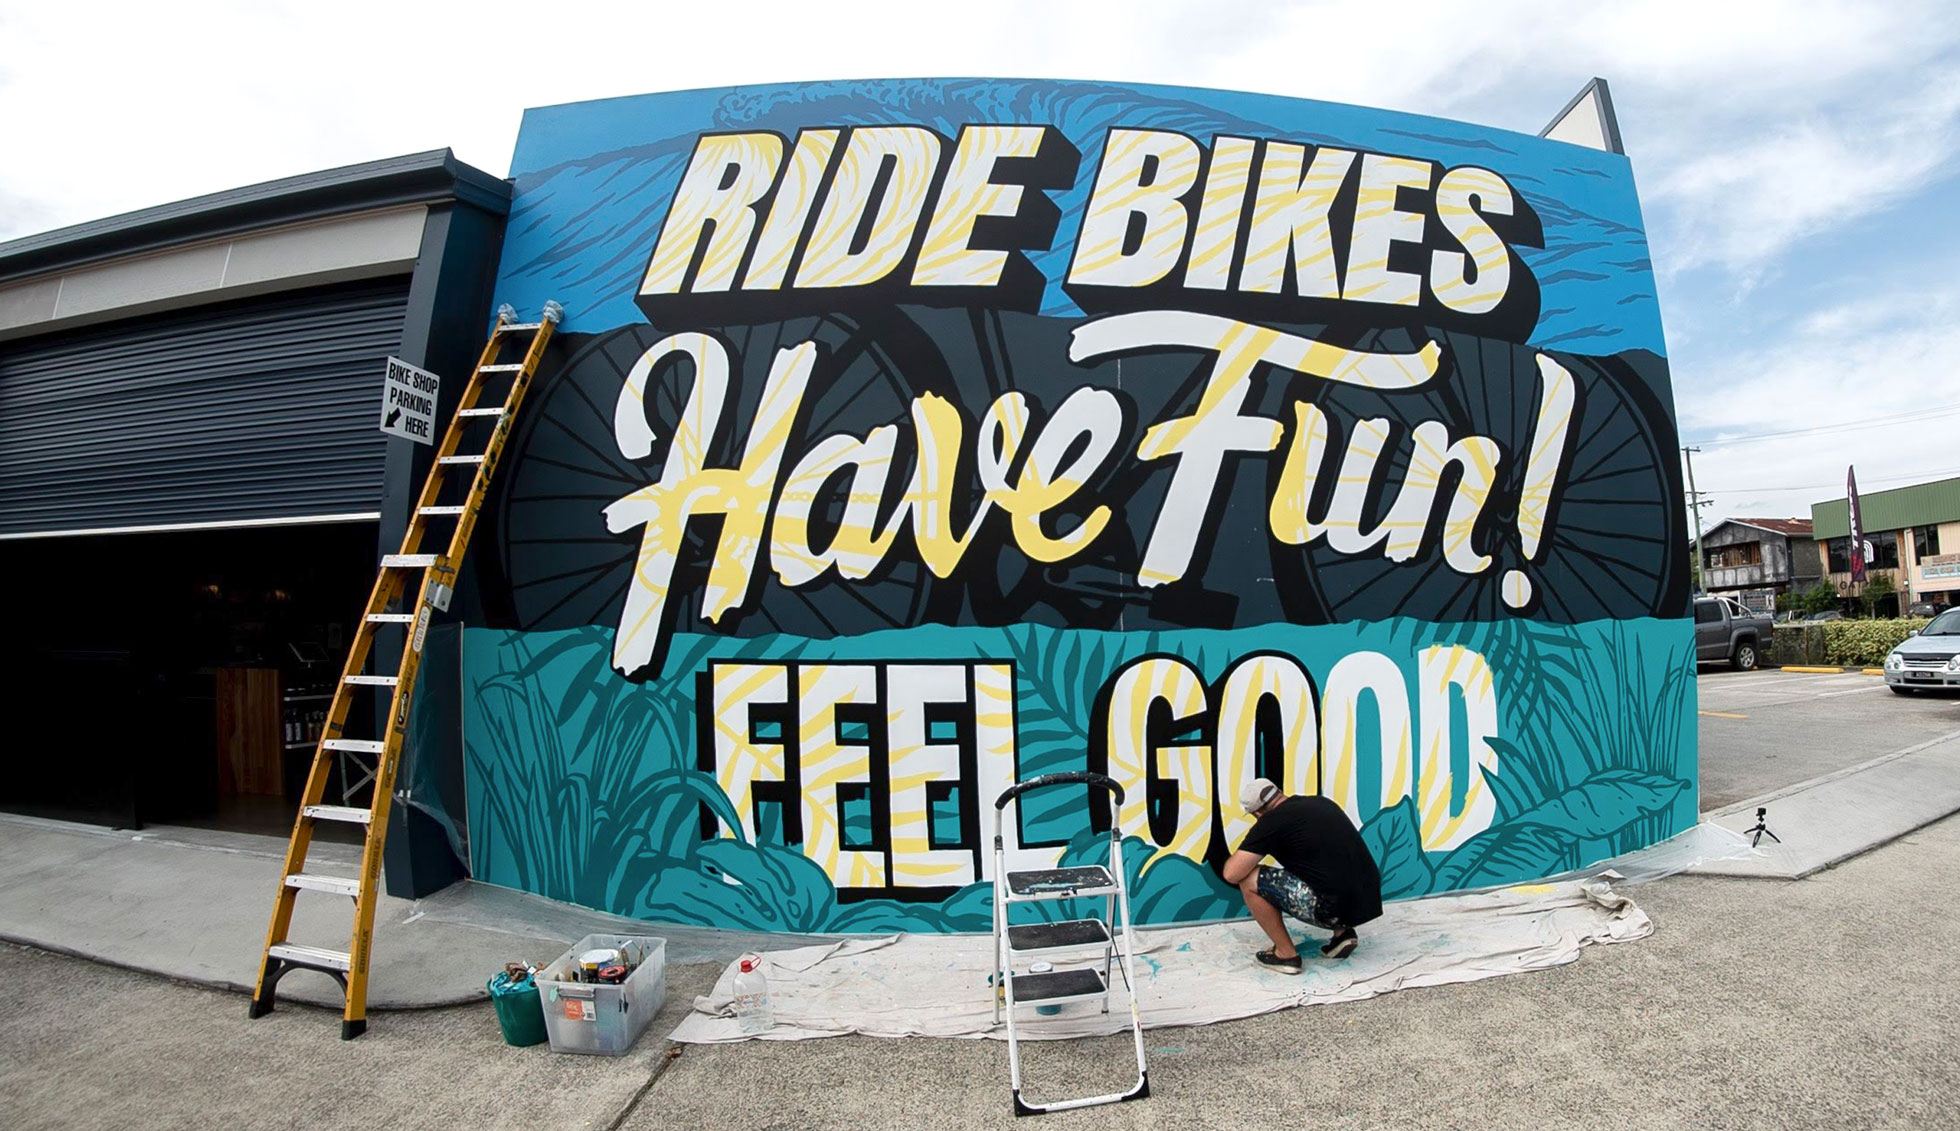 Mural artist Kiel Tillman squats down low to finish the final stages of the Trek mural